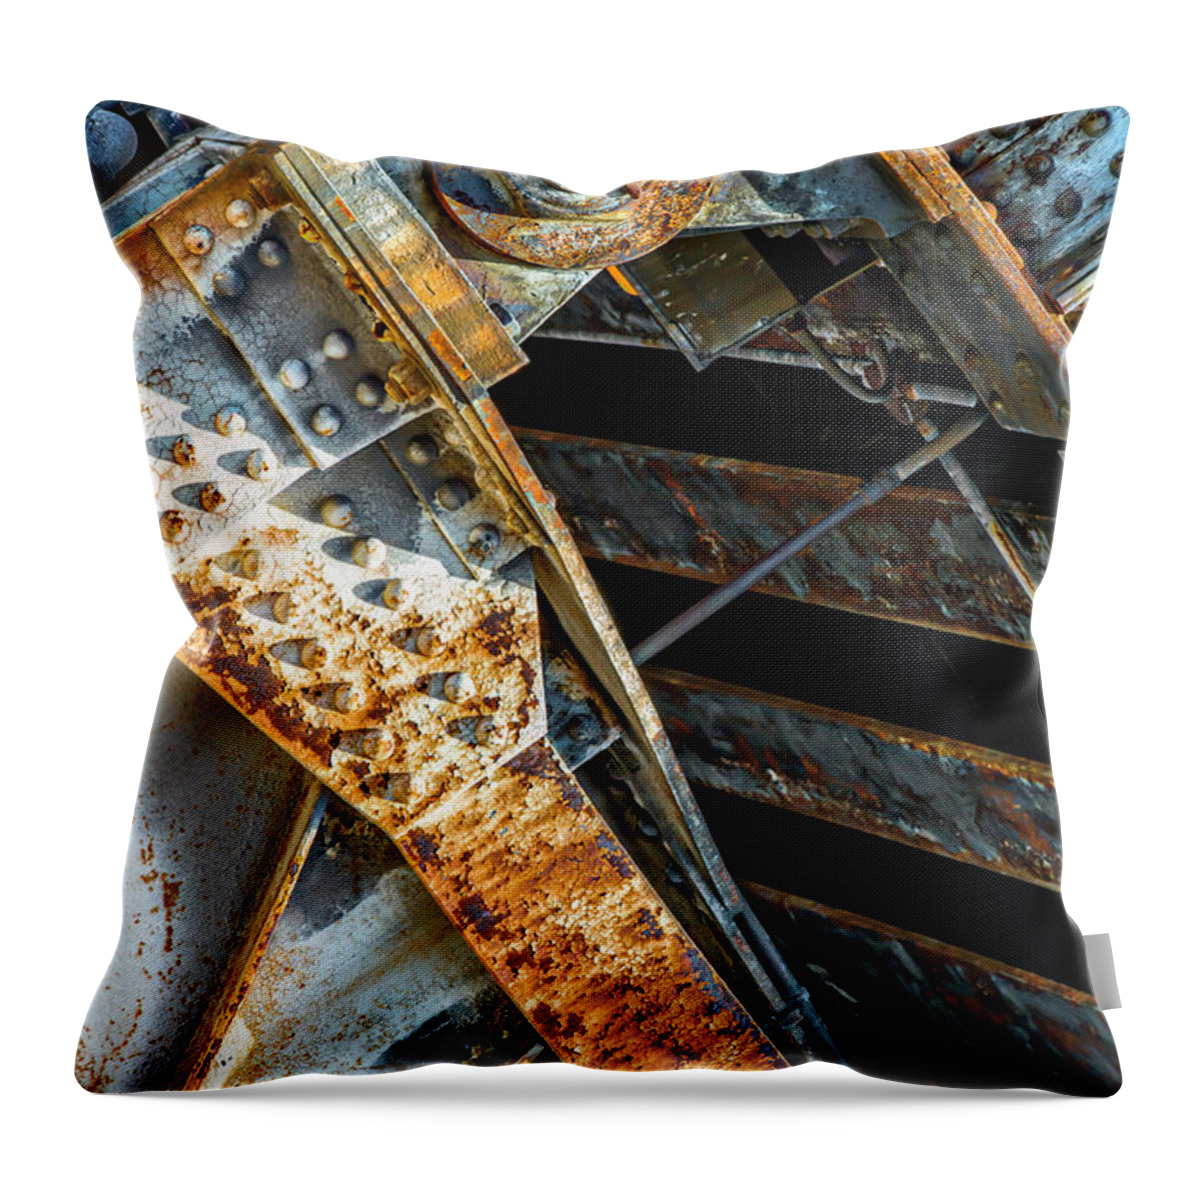 #chicago #architecture #downtown #abstract #design #art #photography #design #abstractarchitecturalphotography #train #bridge #metra Throw Pillow featuring the photograph Union Pacific North Metra train bridge DSC_9832 by Raymond Kunst